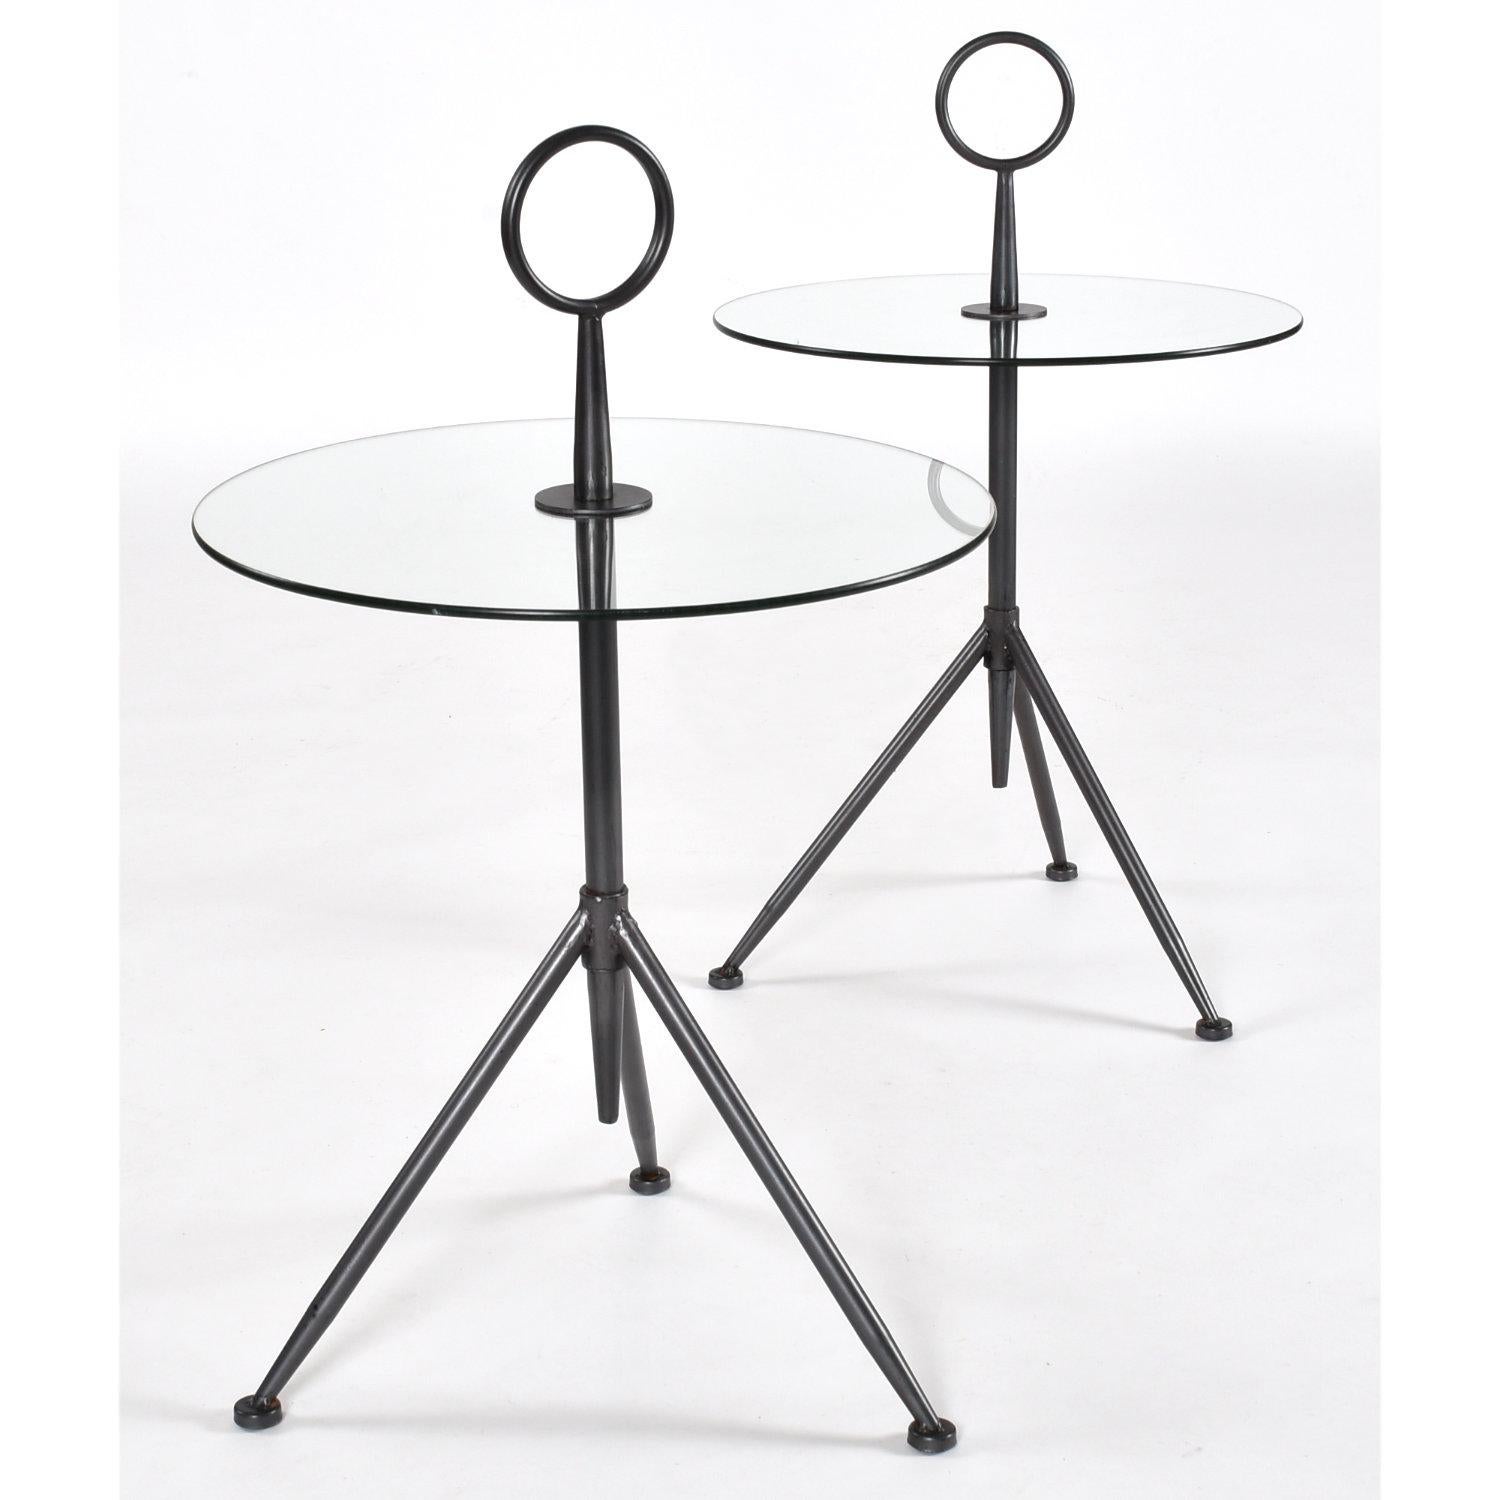 Elegant pair of round Italian modern gueridon side tables. The unique three-legged side tables have a striking sculptural design. These tables make the perfect drink tables. Use the top handle to easily re-arrange the lightweight Cocktail Tables.